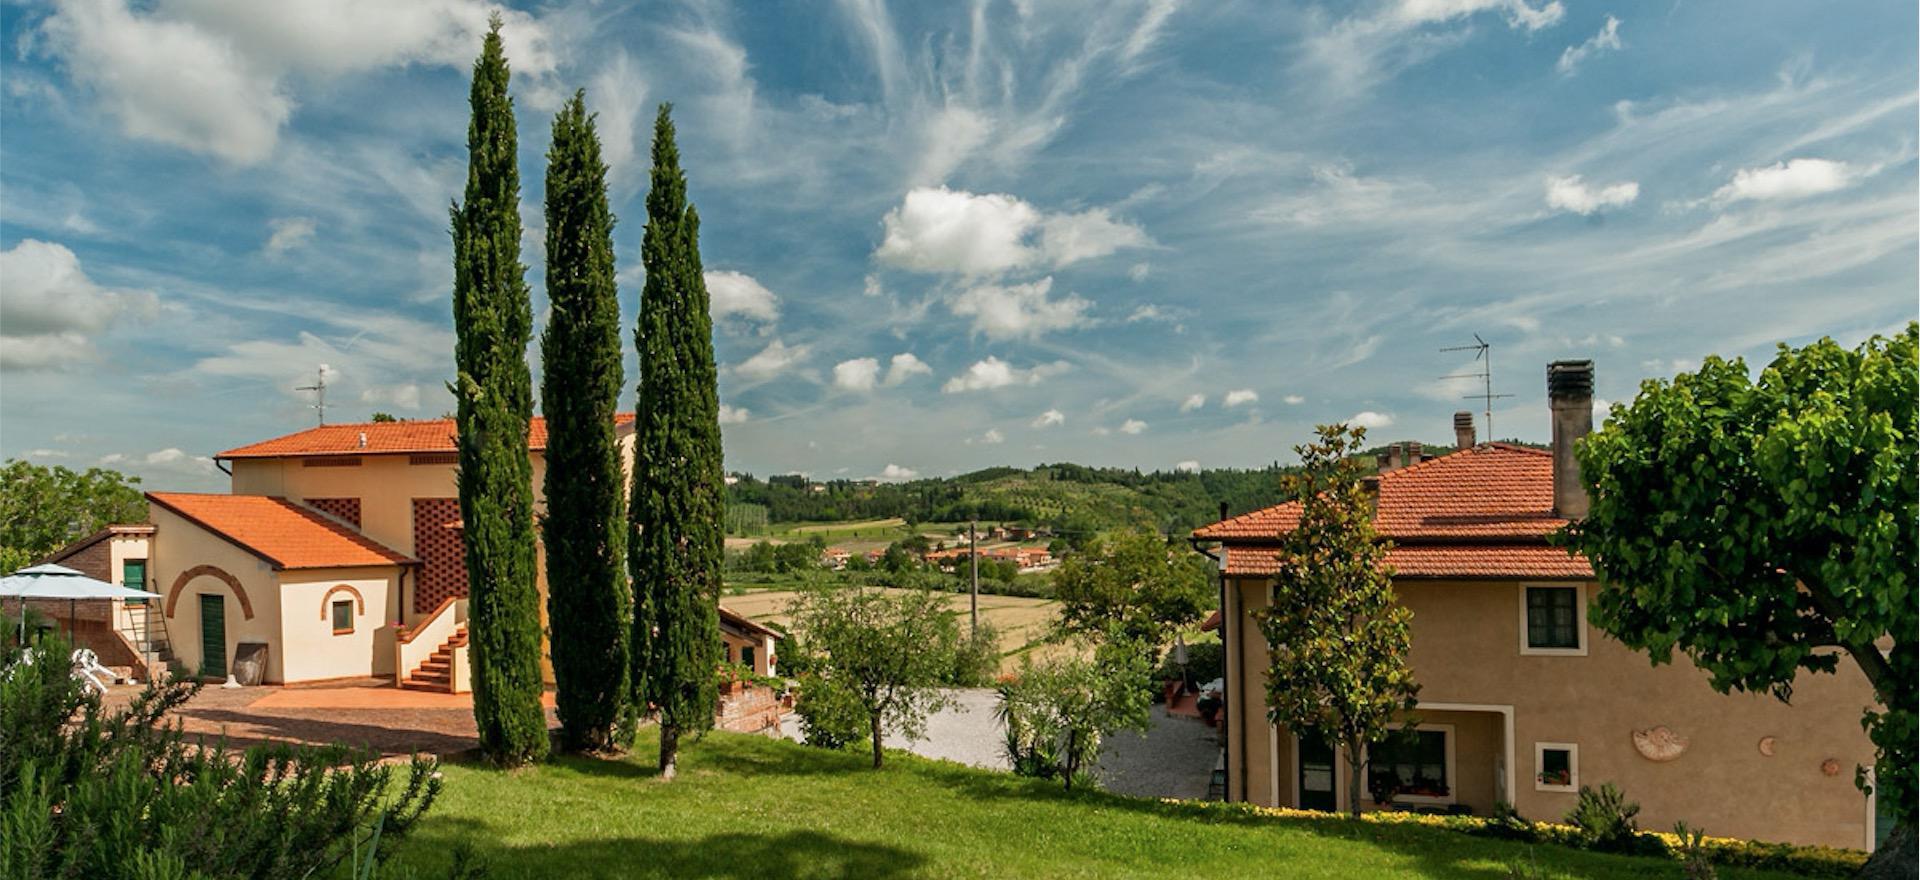 Agriturismo Tuscany Agriturismo for families with large pool and paddling pool